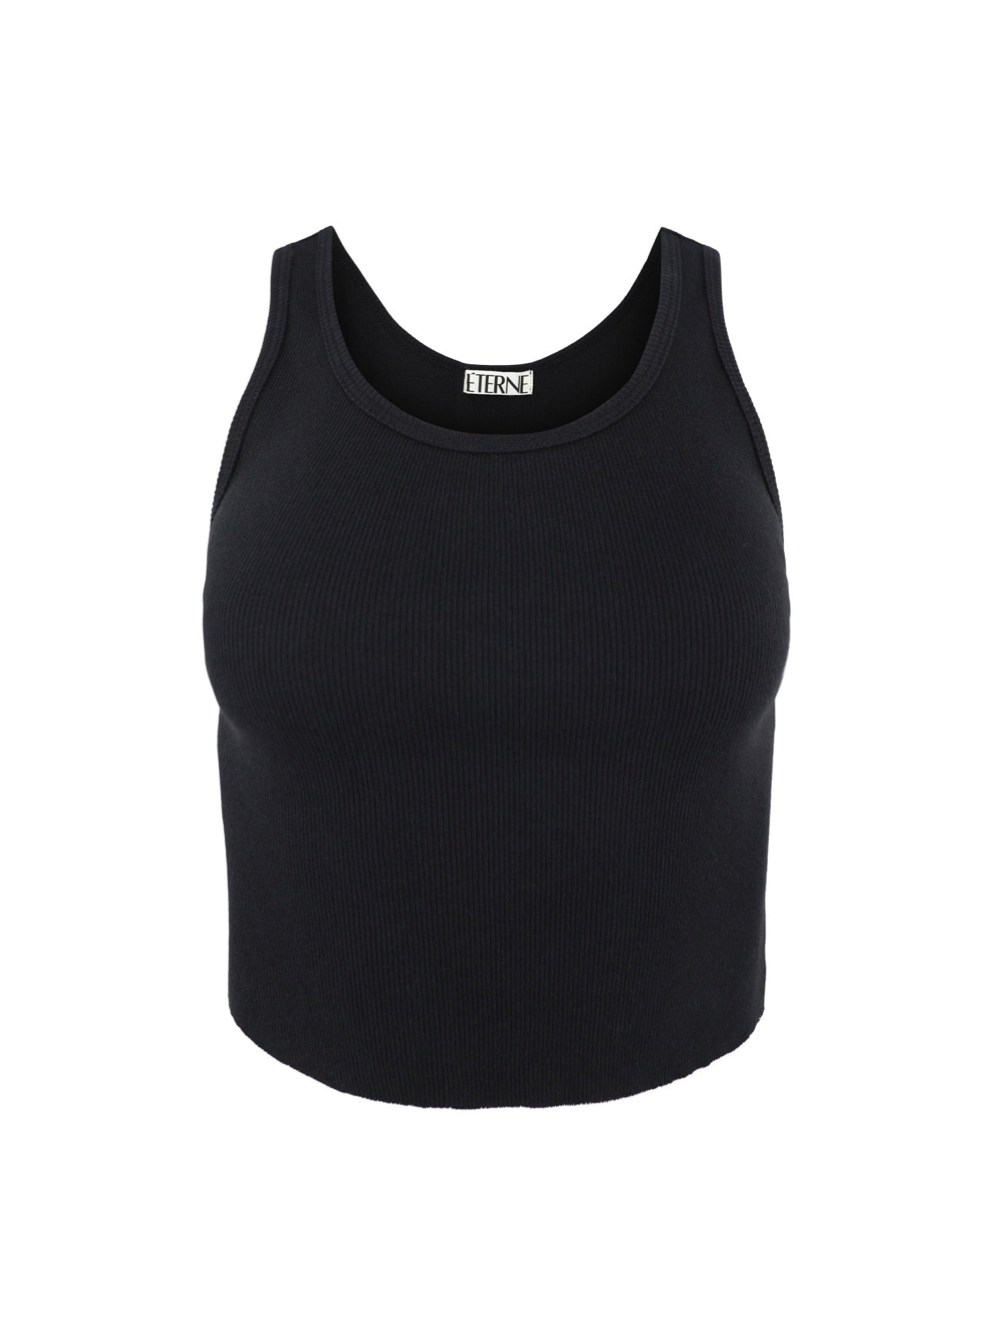  Women's Crop Tank Top Cotton Scoop Racerback Sleeveless Slim  Fit Tops Black S : Clothing, Shoes & Jewelry